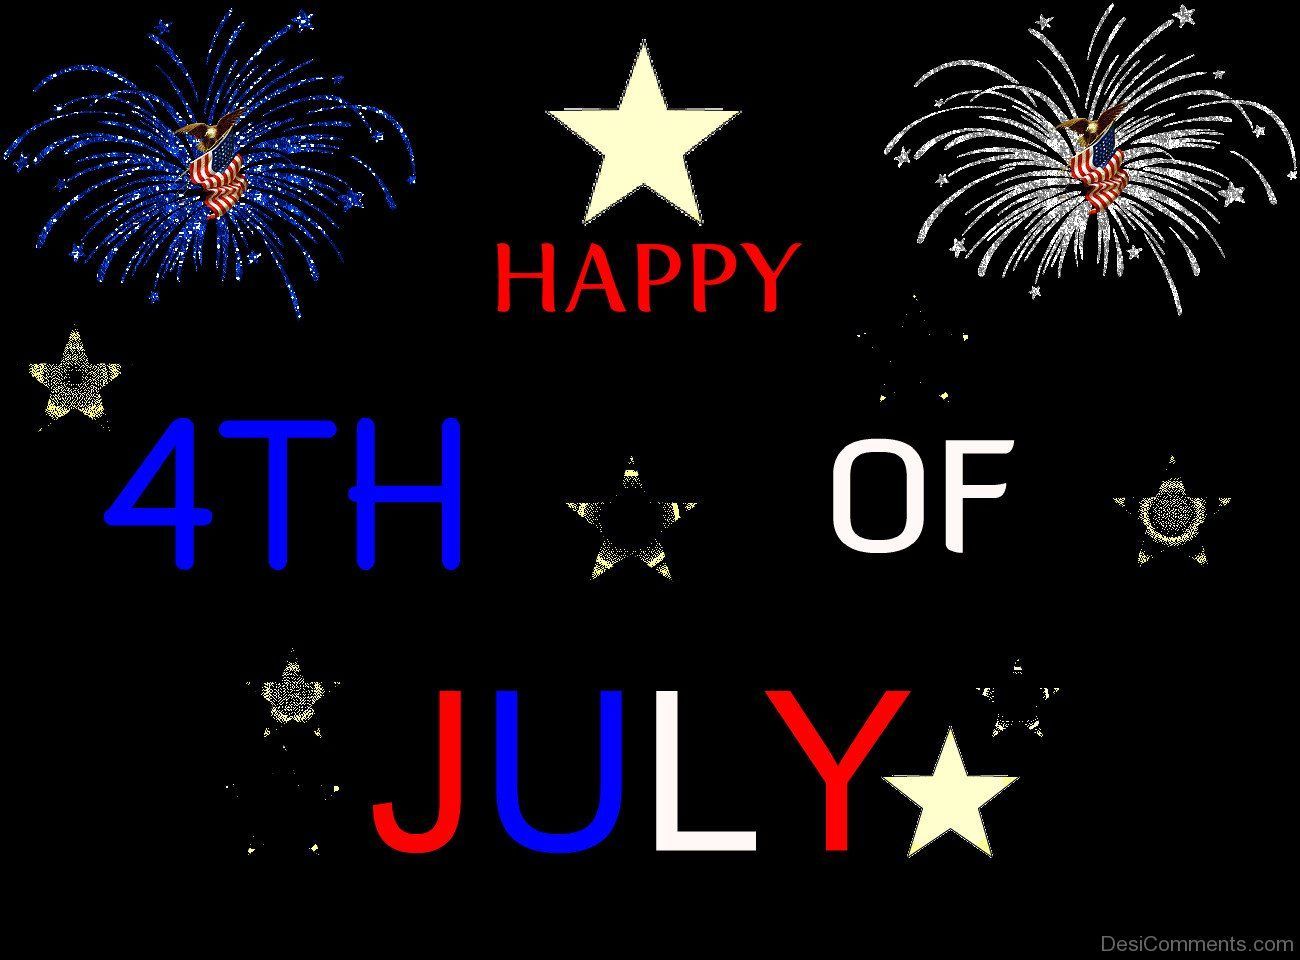 Happy 4th of July Image 2018. Fourth of July Image, Photo, Picture, Pics, Wallpaper Free Download Hapth of july image, Greetings image, Happy 4 of july